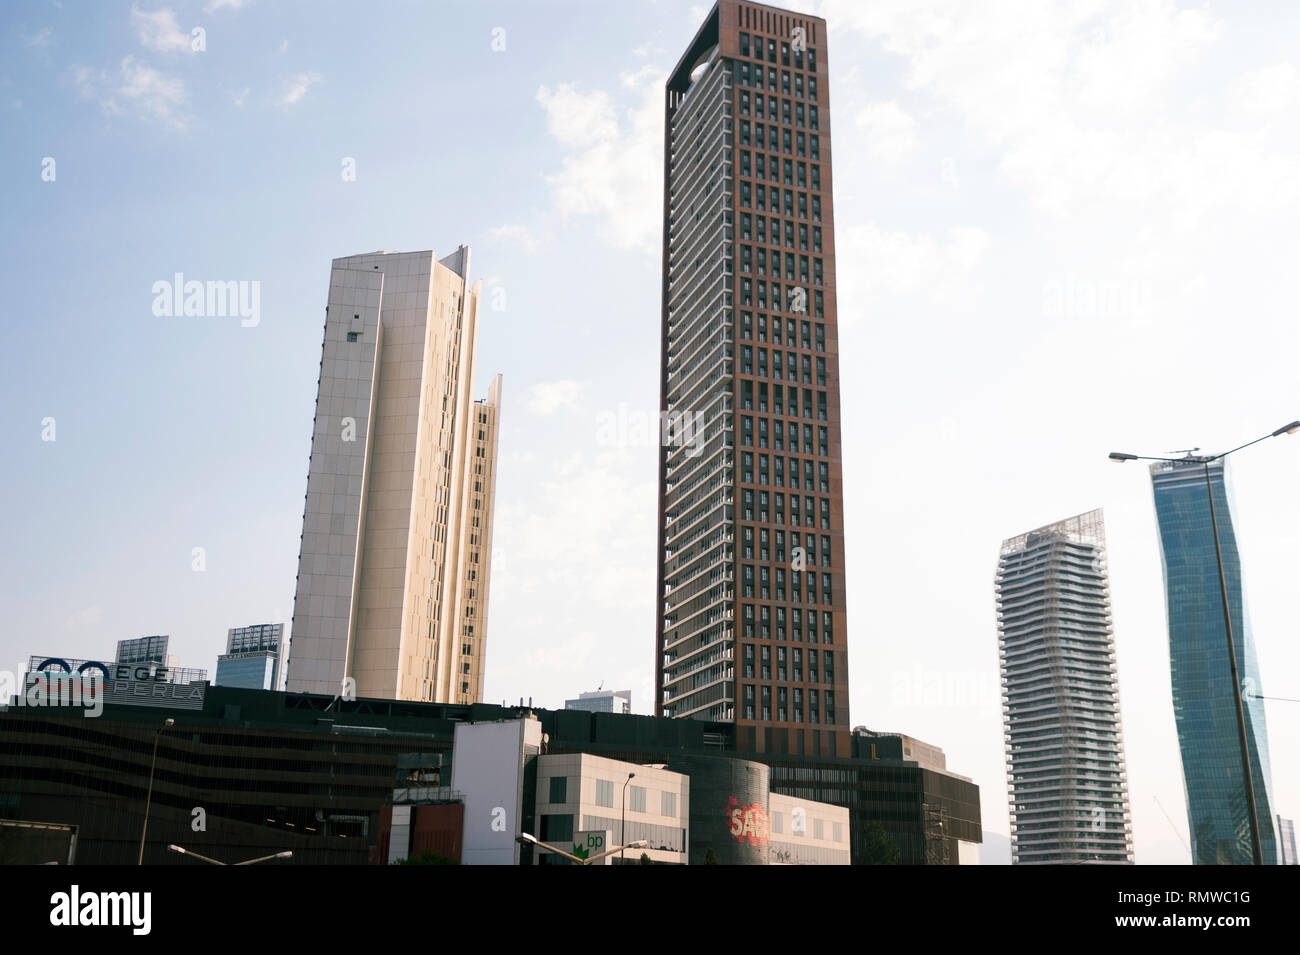 Izmir, Turkey - August  8, 2018: Mistral and Ege perla towers view from Altinyol Izmir with Sabah Newspaper office building. Stock Photo